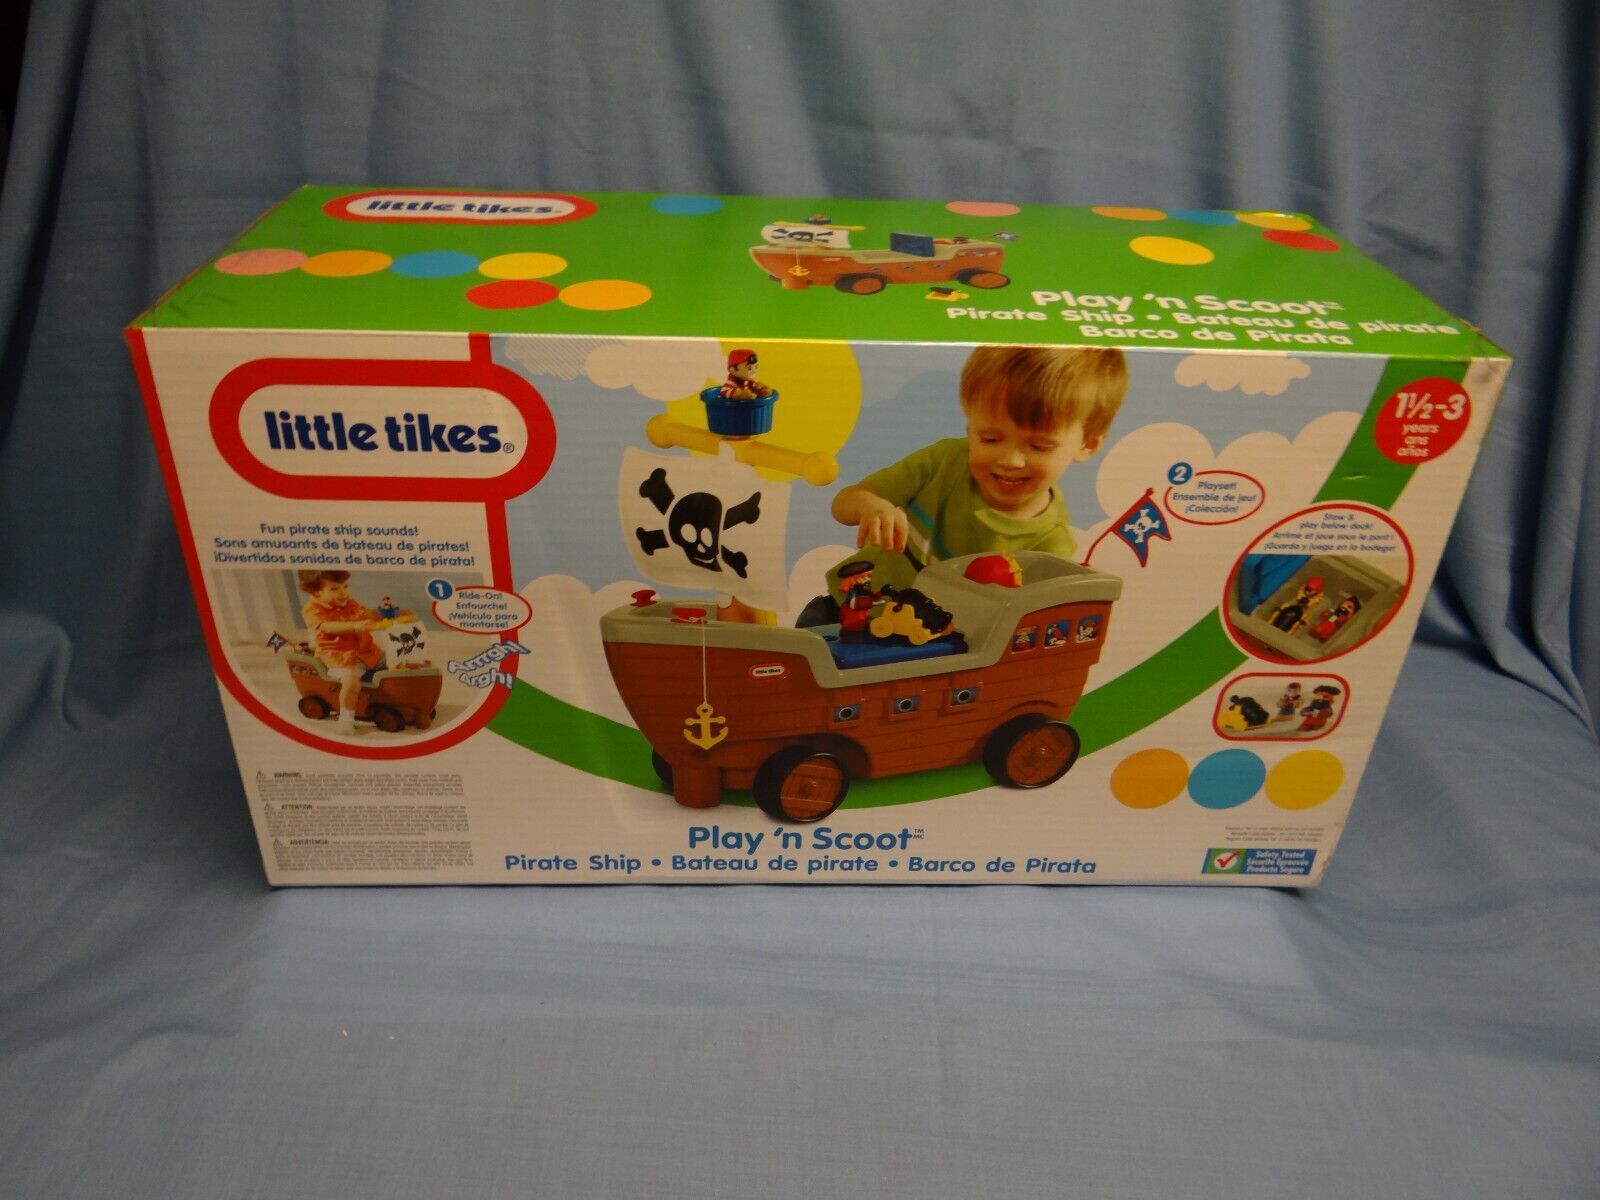 LITTLE TIKES PLAY AND SCOOT PIRATE SHIP Little Tikes does not apply - фотография #2